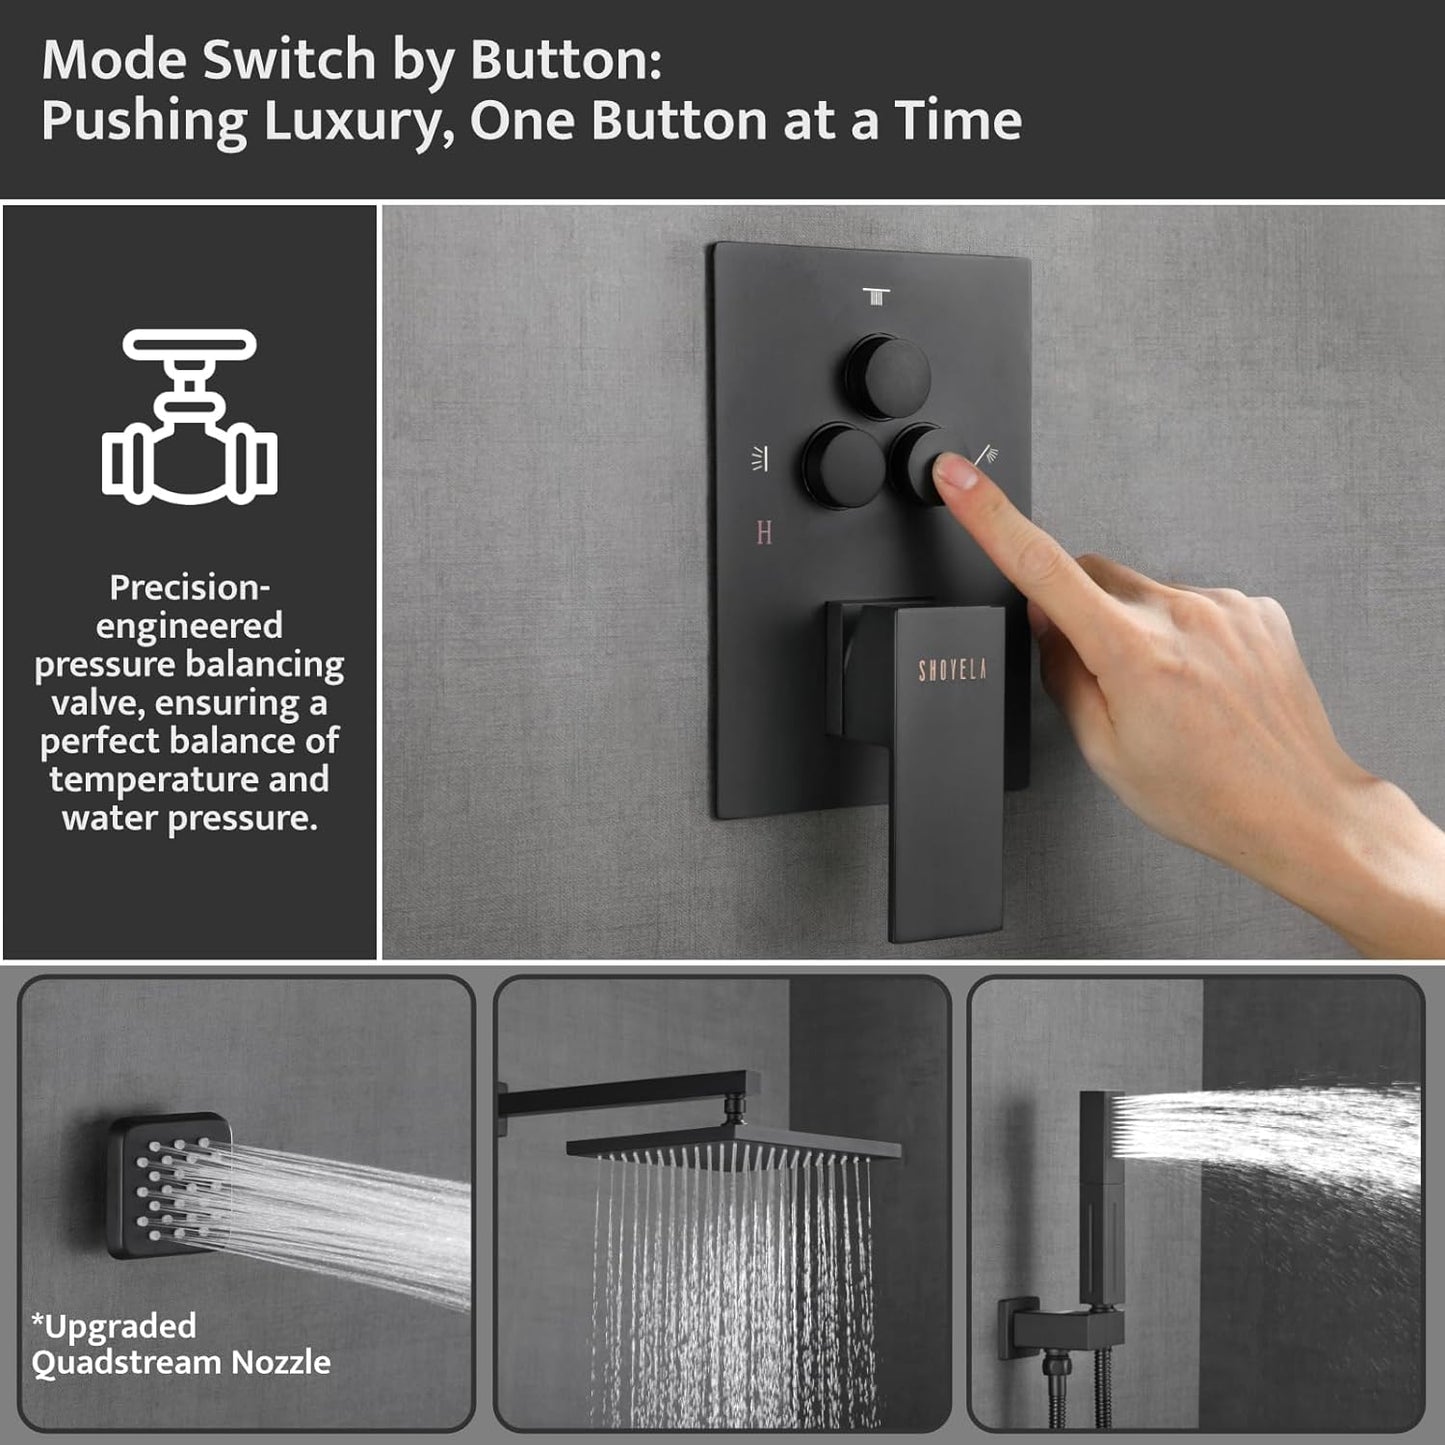 SHOYELA Shower System Matte Black Wall Mount Shower Faucet Set with 4PCS Body Jets, Push Button Diverter Shower Fixtures with 2 in 1 Handheld,10 Inch Shower HeadAll Functions Simultaneous Use